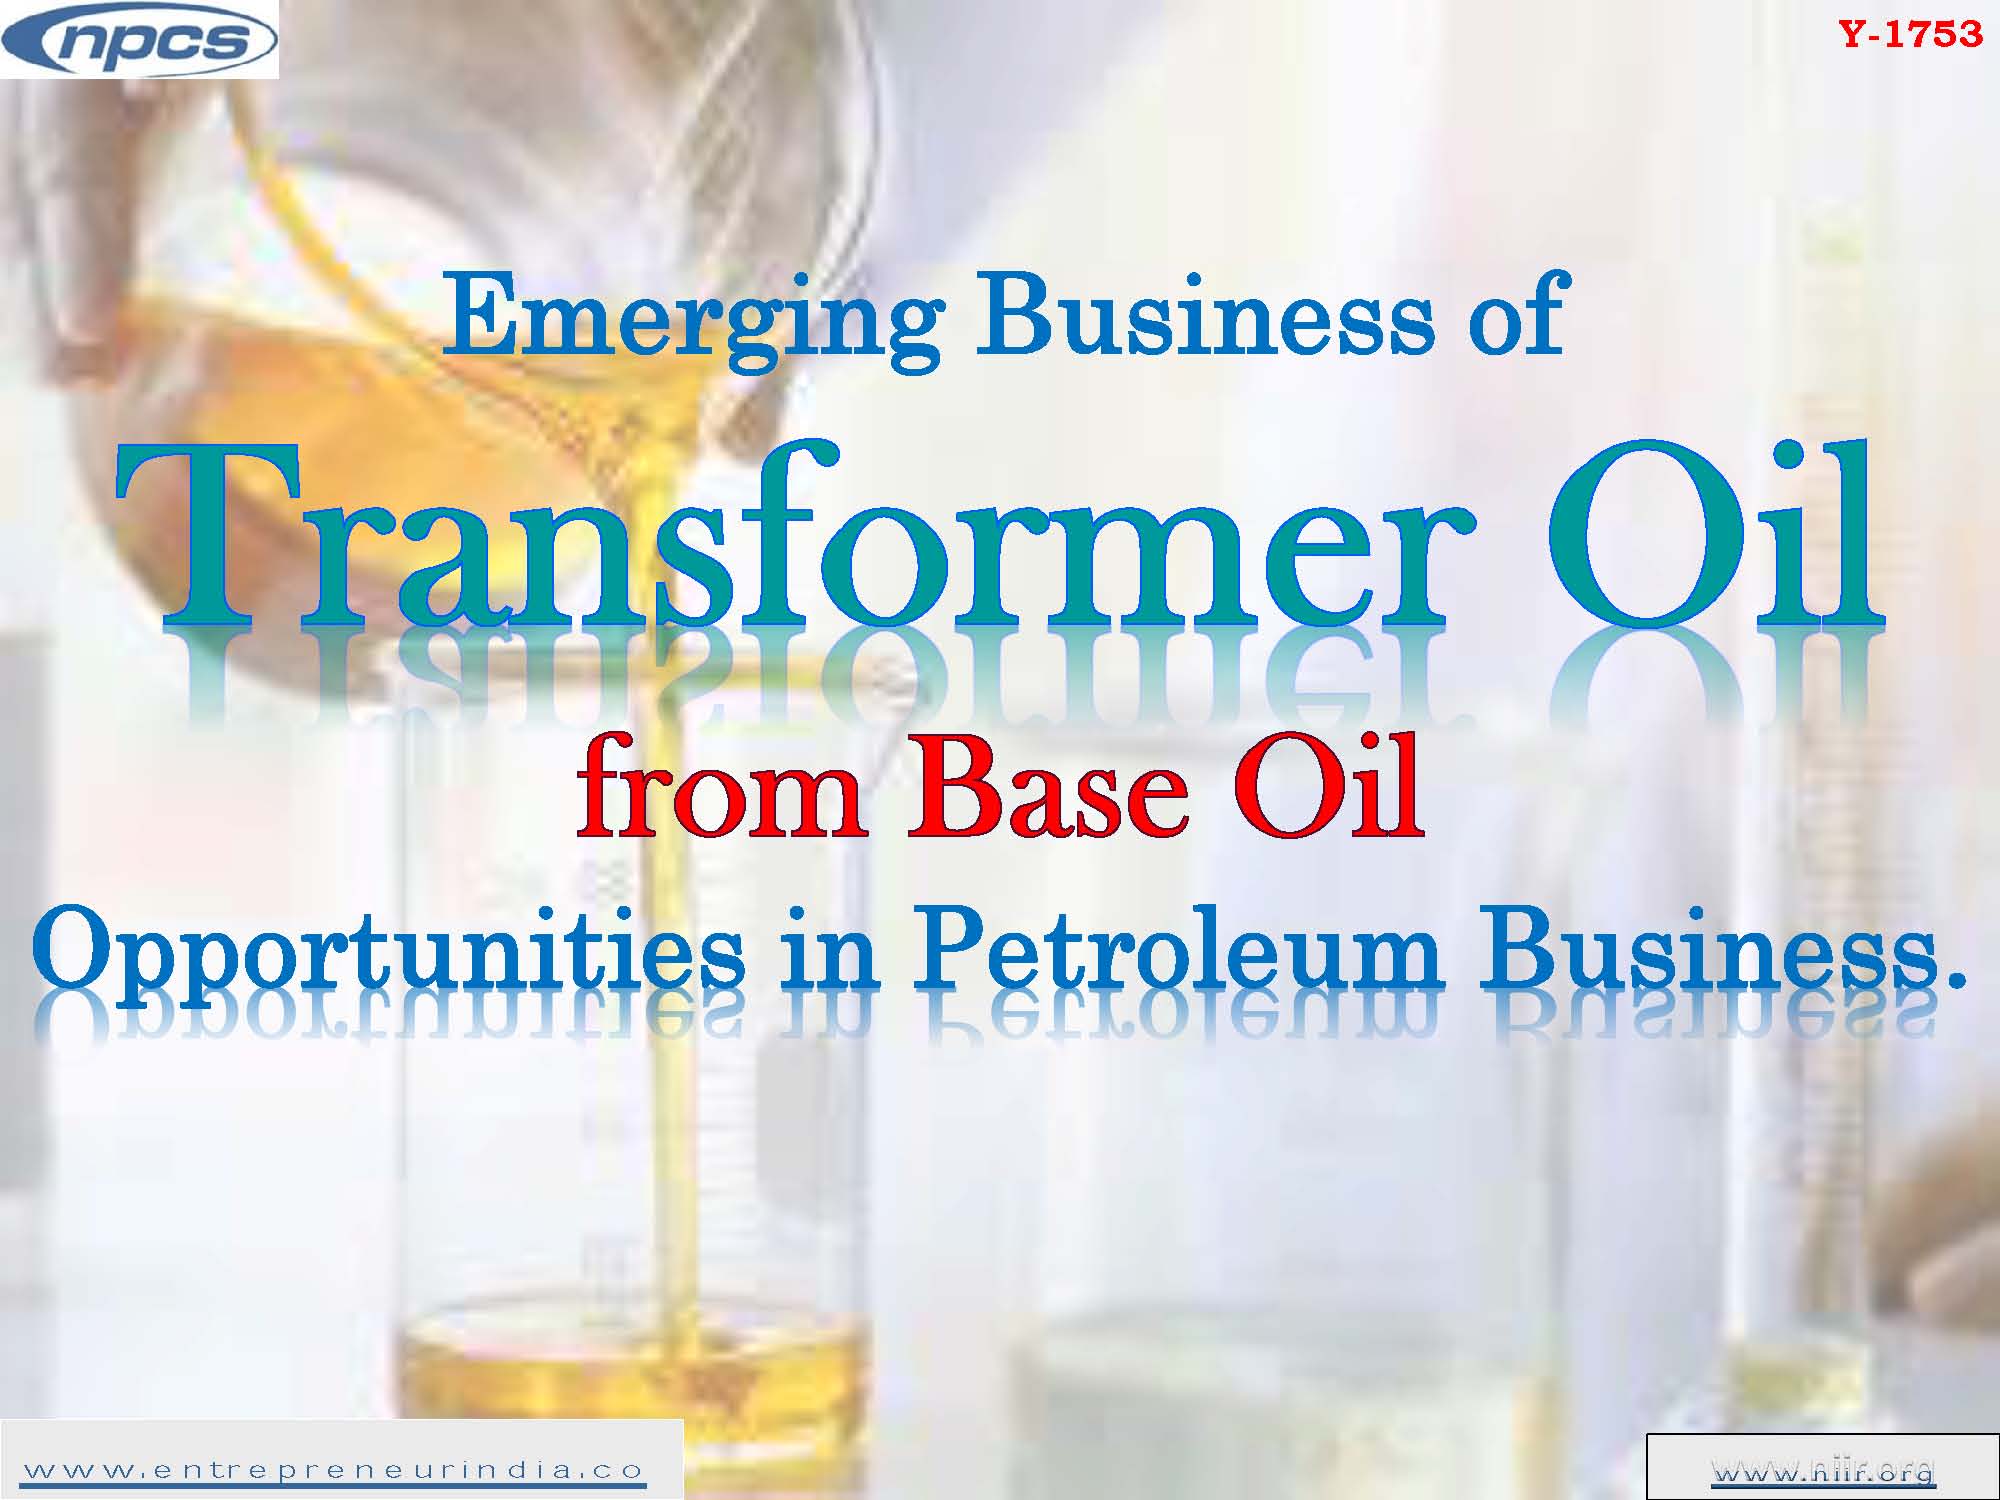 Emerging Business of Transformer Oil from Base Oil Opportunities in Petroleum Business